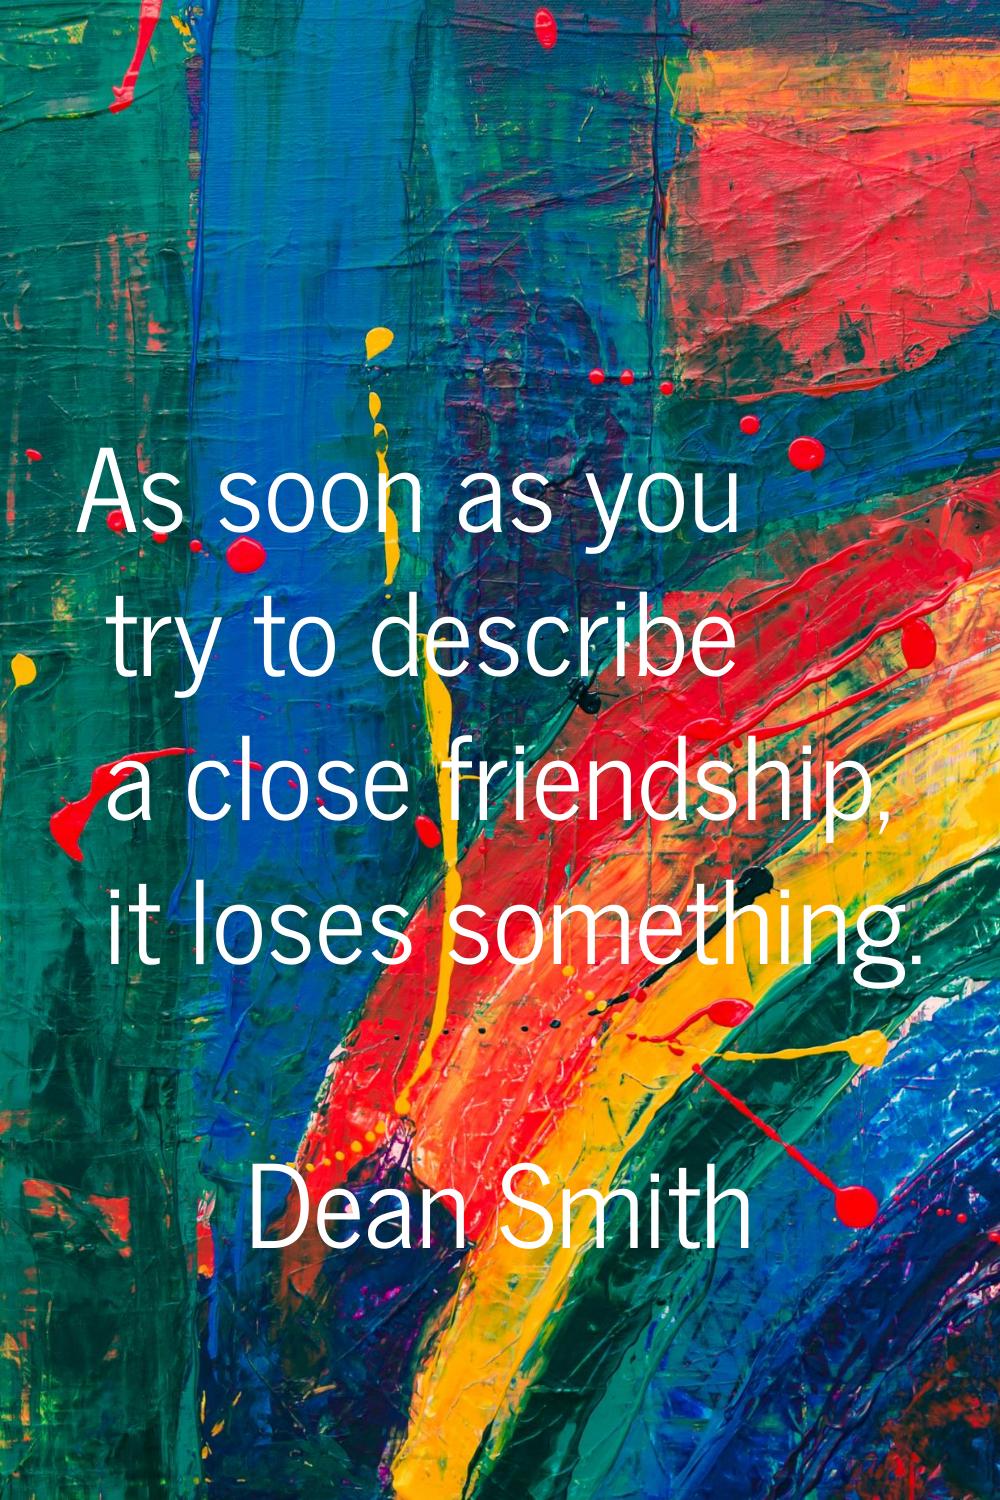 As soon as you try to describe a close friendship, it loses something.